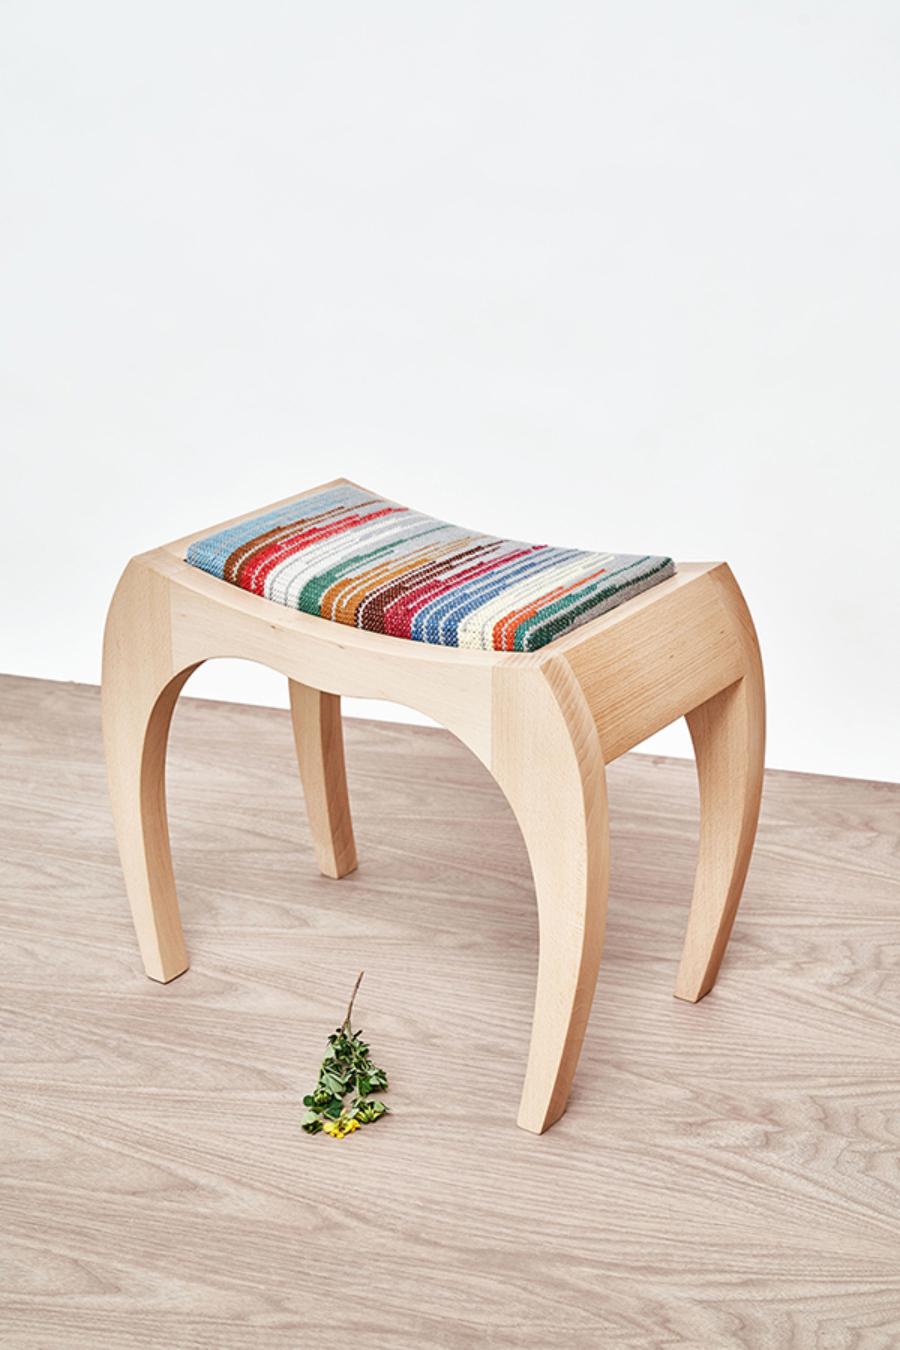 RUMBO unic stool by Jean-Baptiste Van den Heede.
Dimensions: W 49 x D 28 x H 40 cm
Materials: white beech, textile.
Also available: other textiles available.

The “RUMBO unic” version proposes a unique loom upholstered stool made by hand, it